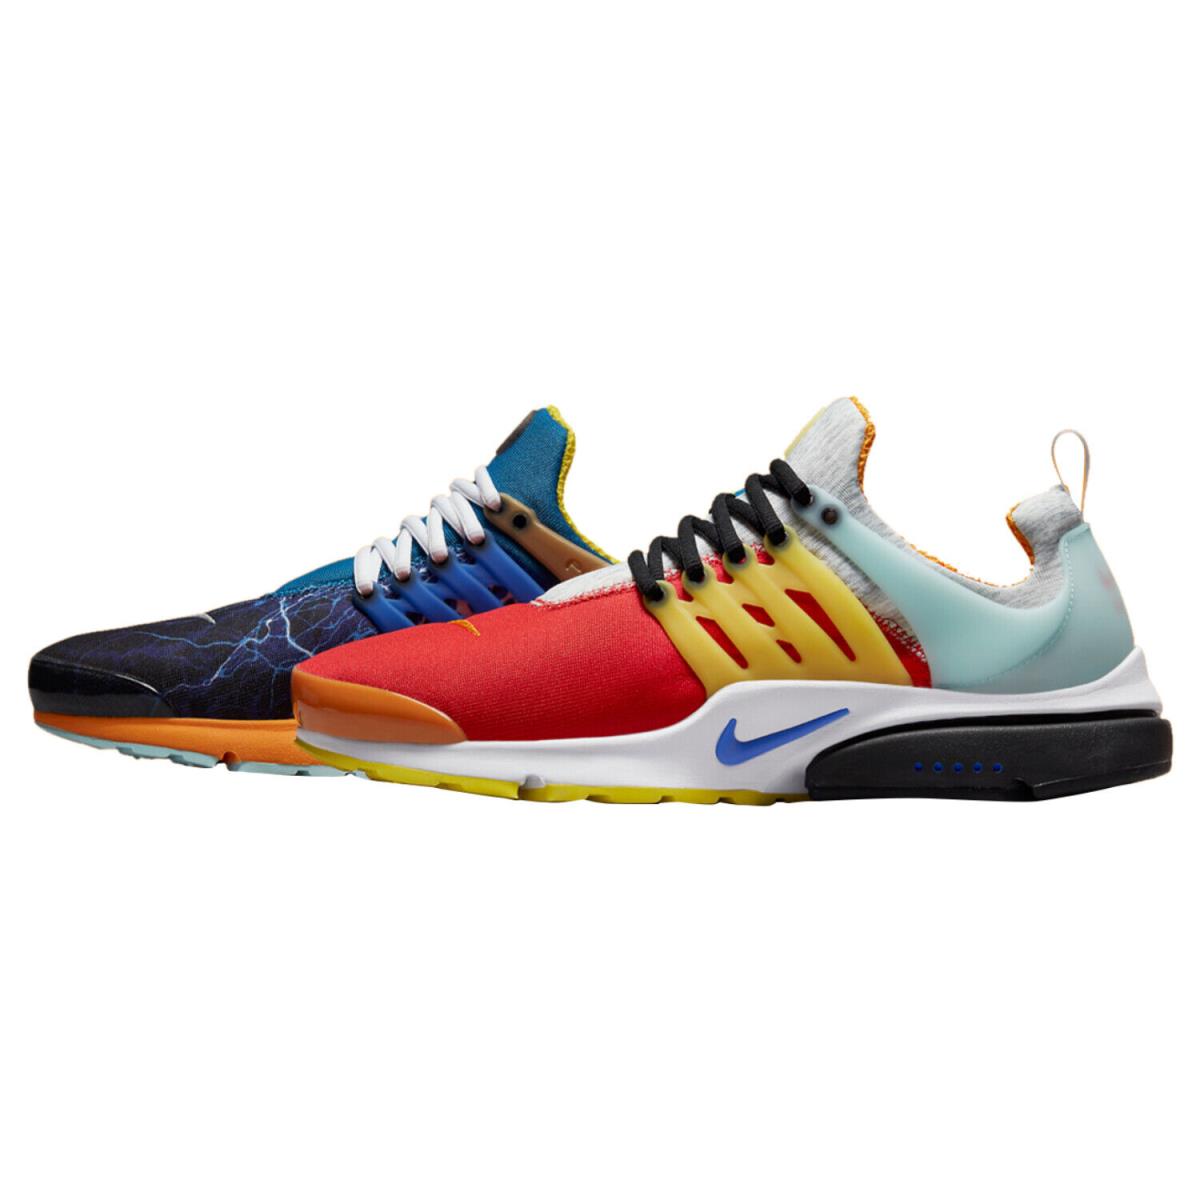 Nike Air Presto What The DM9554-900 Multi Color Shoes Mens Size XS 5 - 7